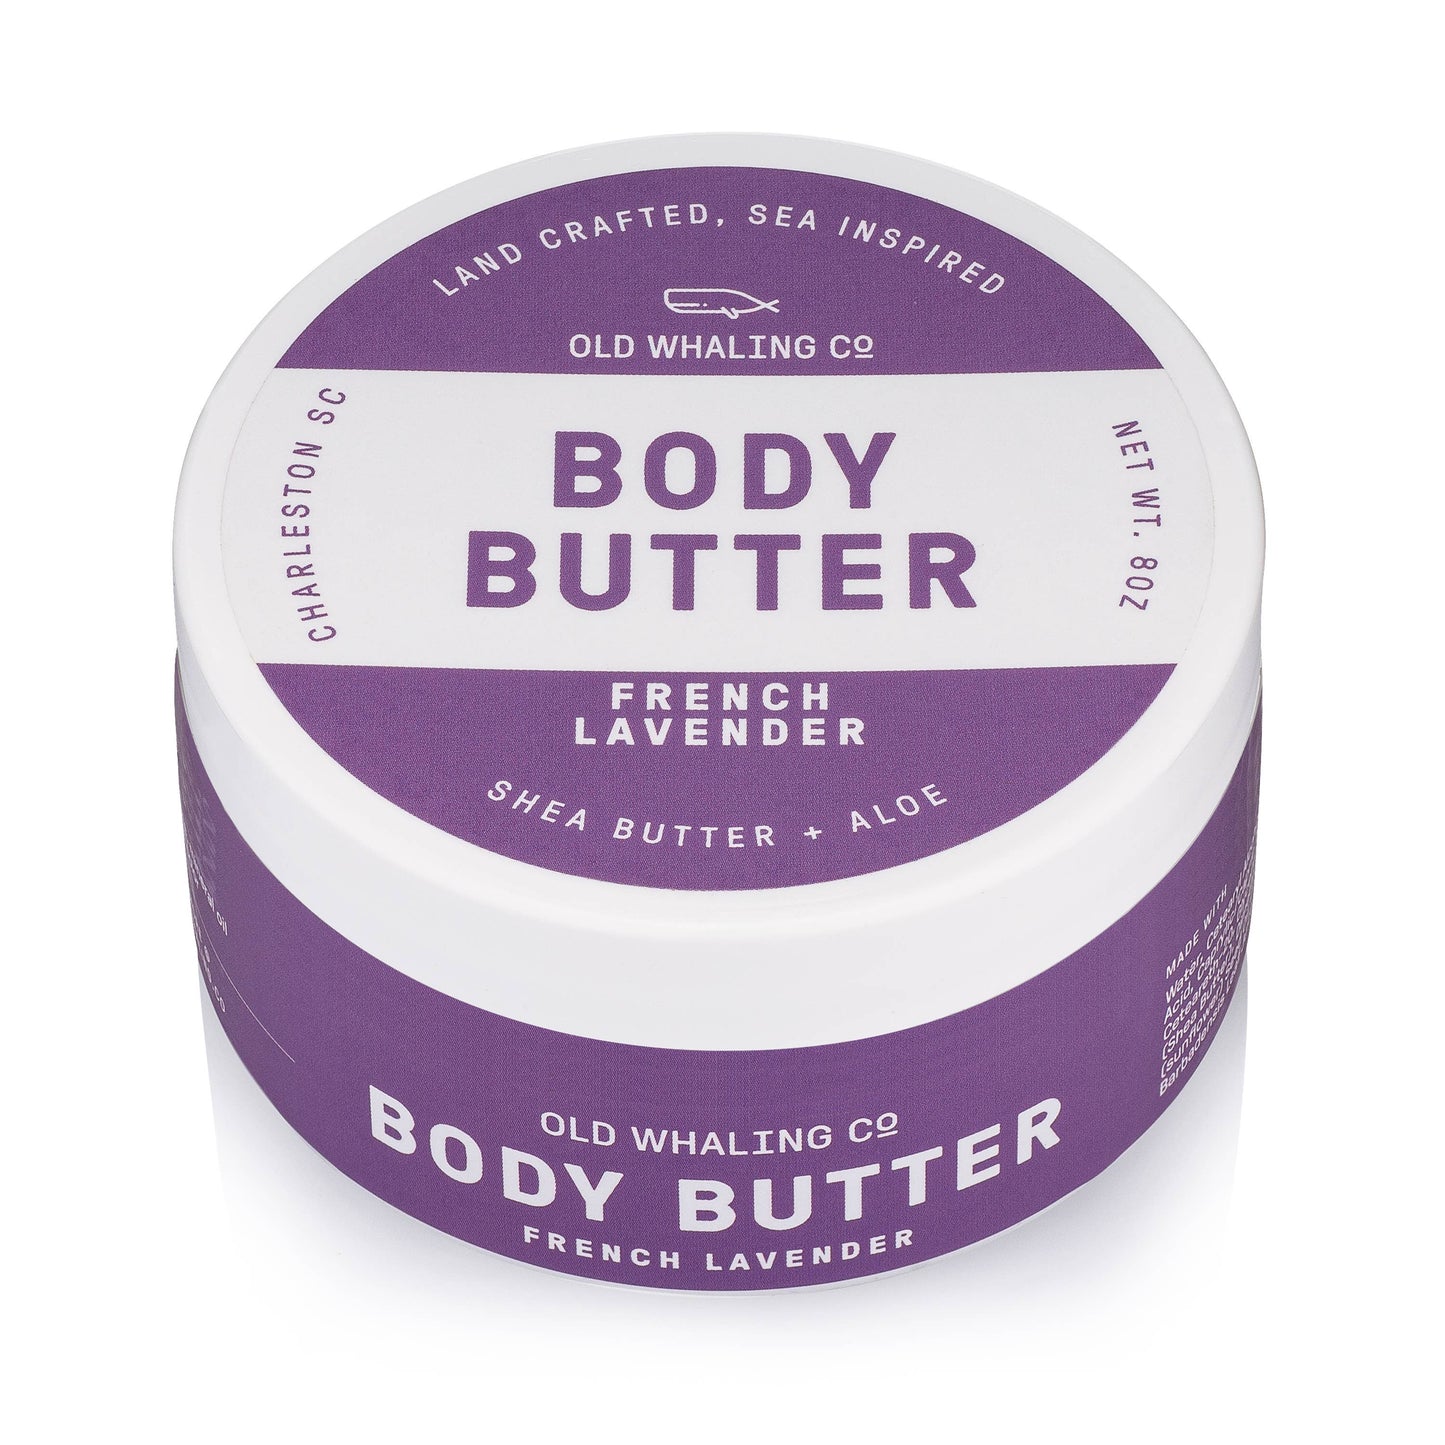 Old Whaling Company - French Lavender Body Butter (8oz)